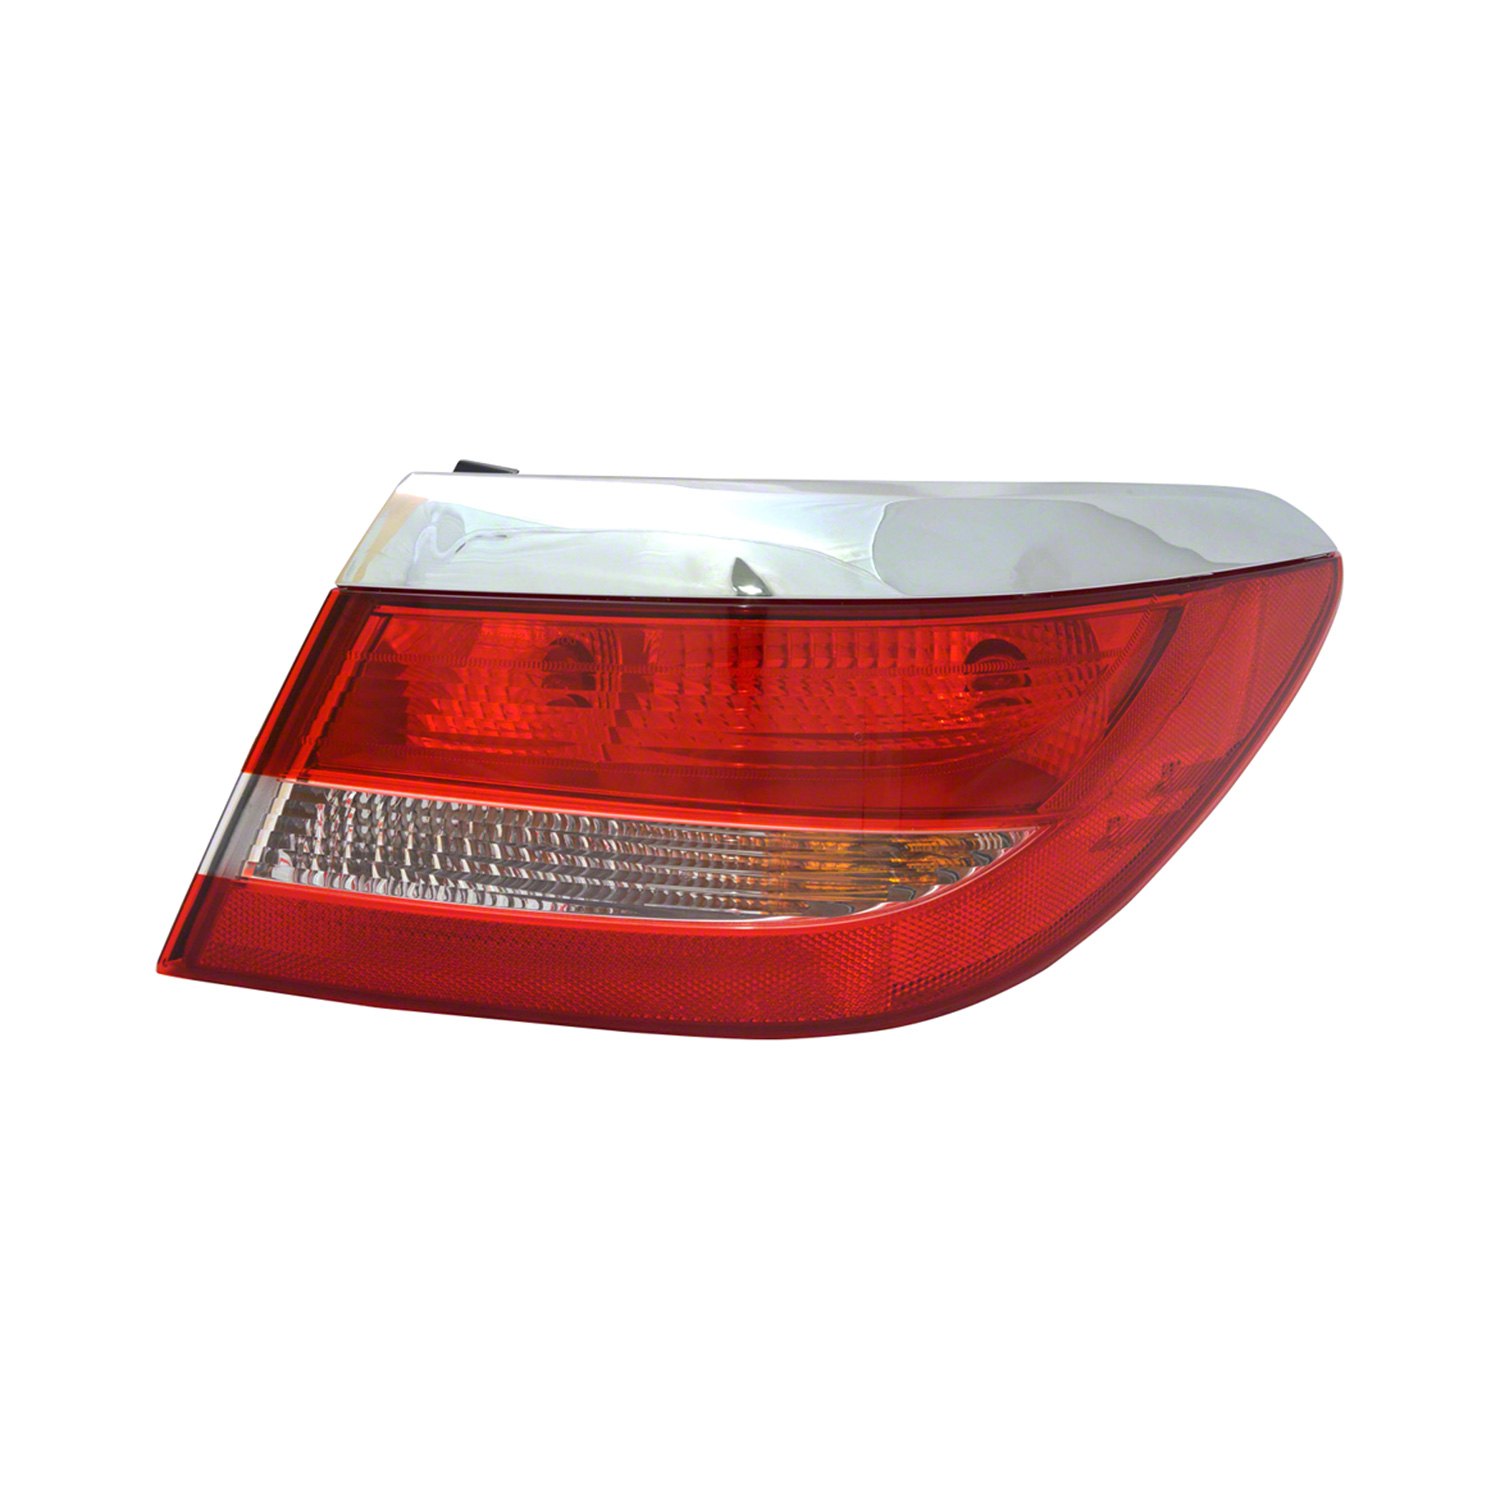 Pacific Best® - Buick Verano 2012 Replacement Tail Light 2012 Buick Verano Tail Light Bulb Replacement